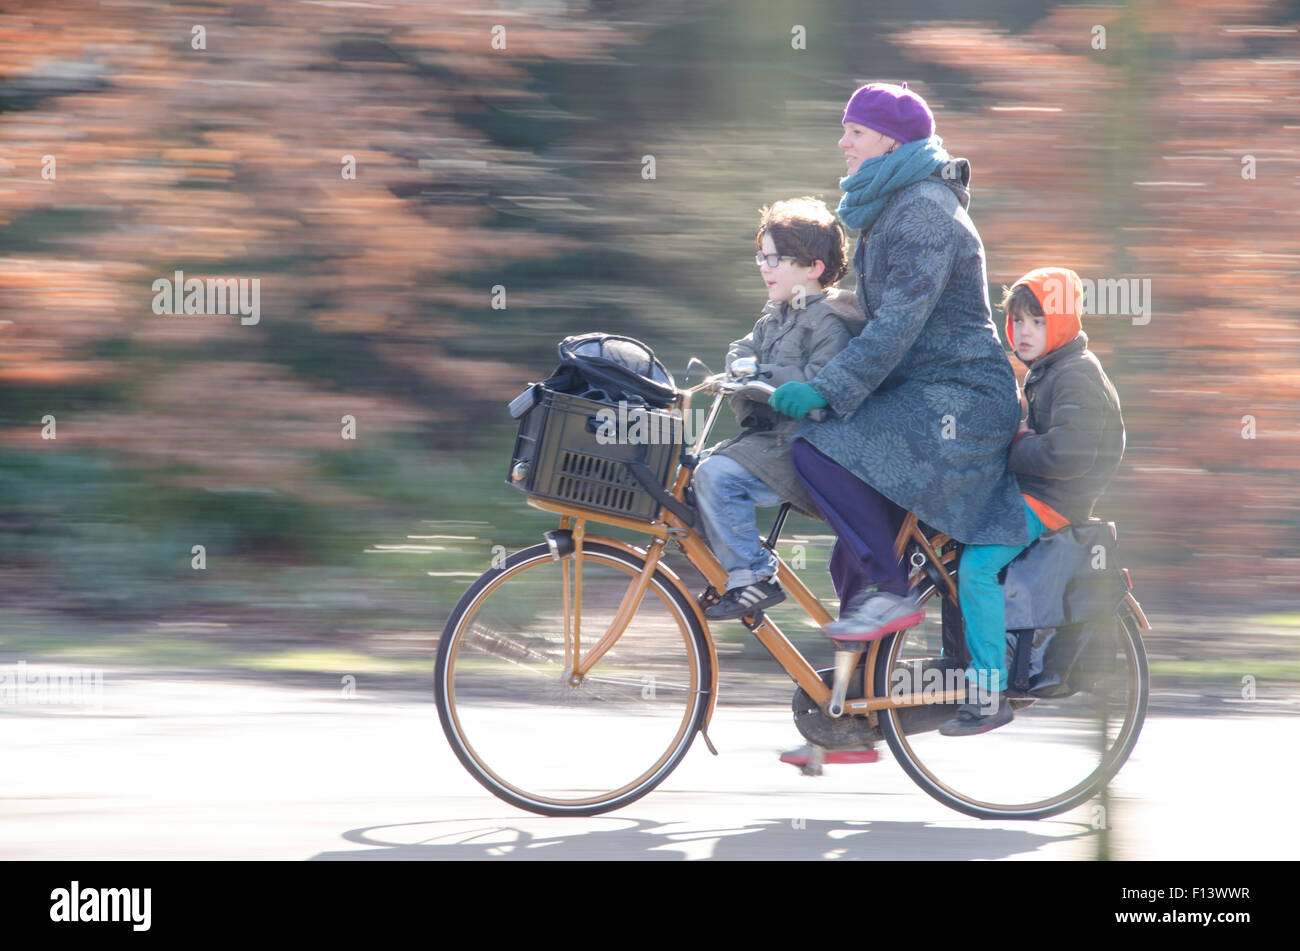 An entire family on a bike in Amsterdam. Stock Photo